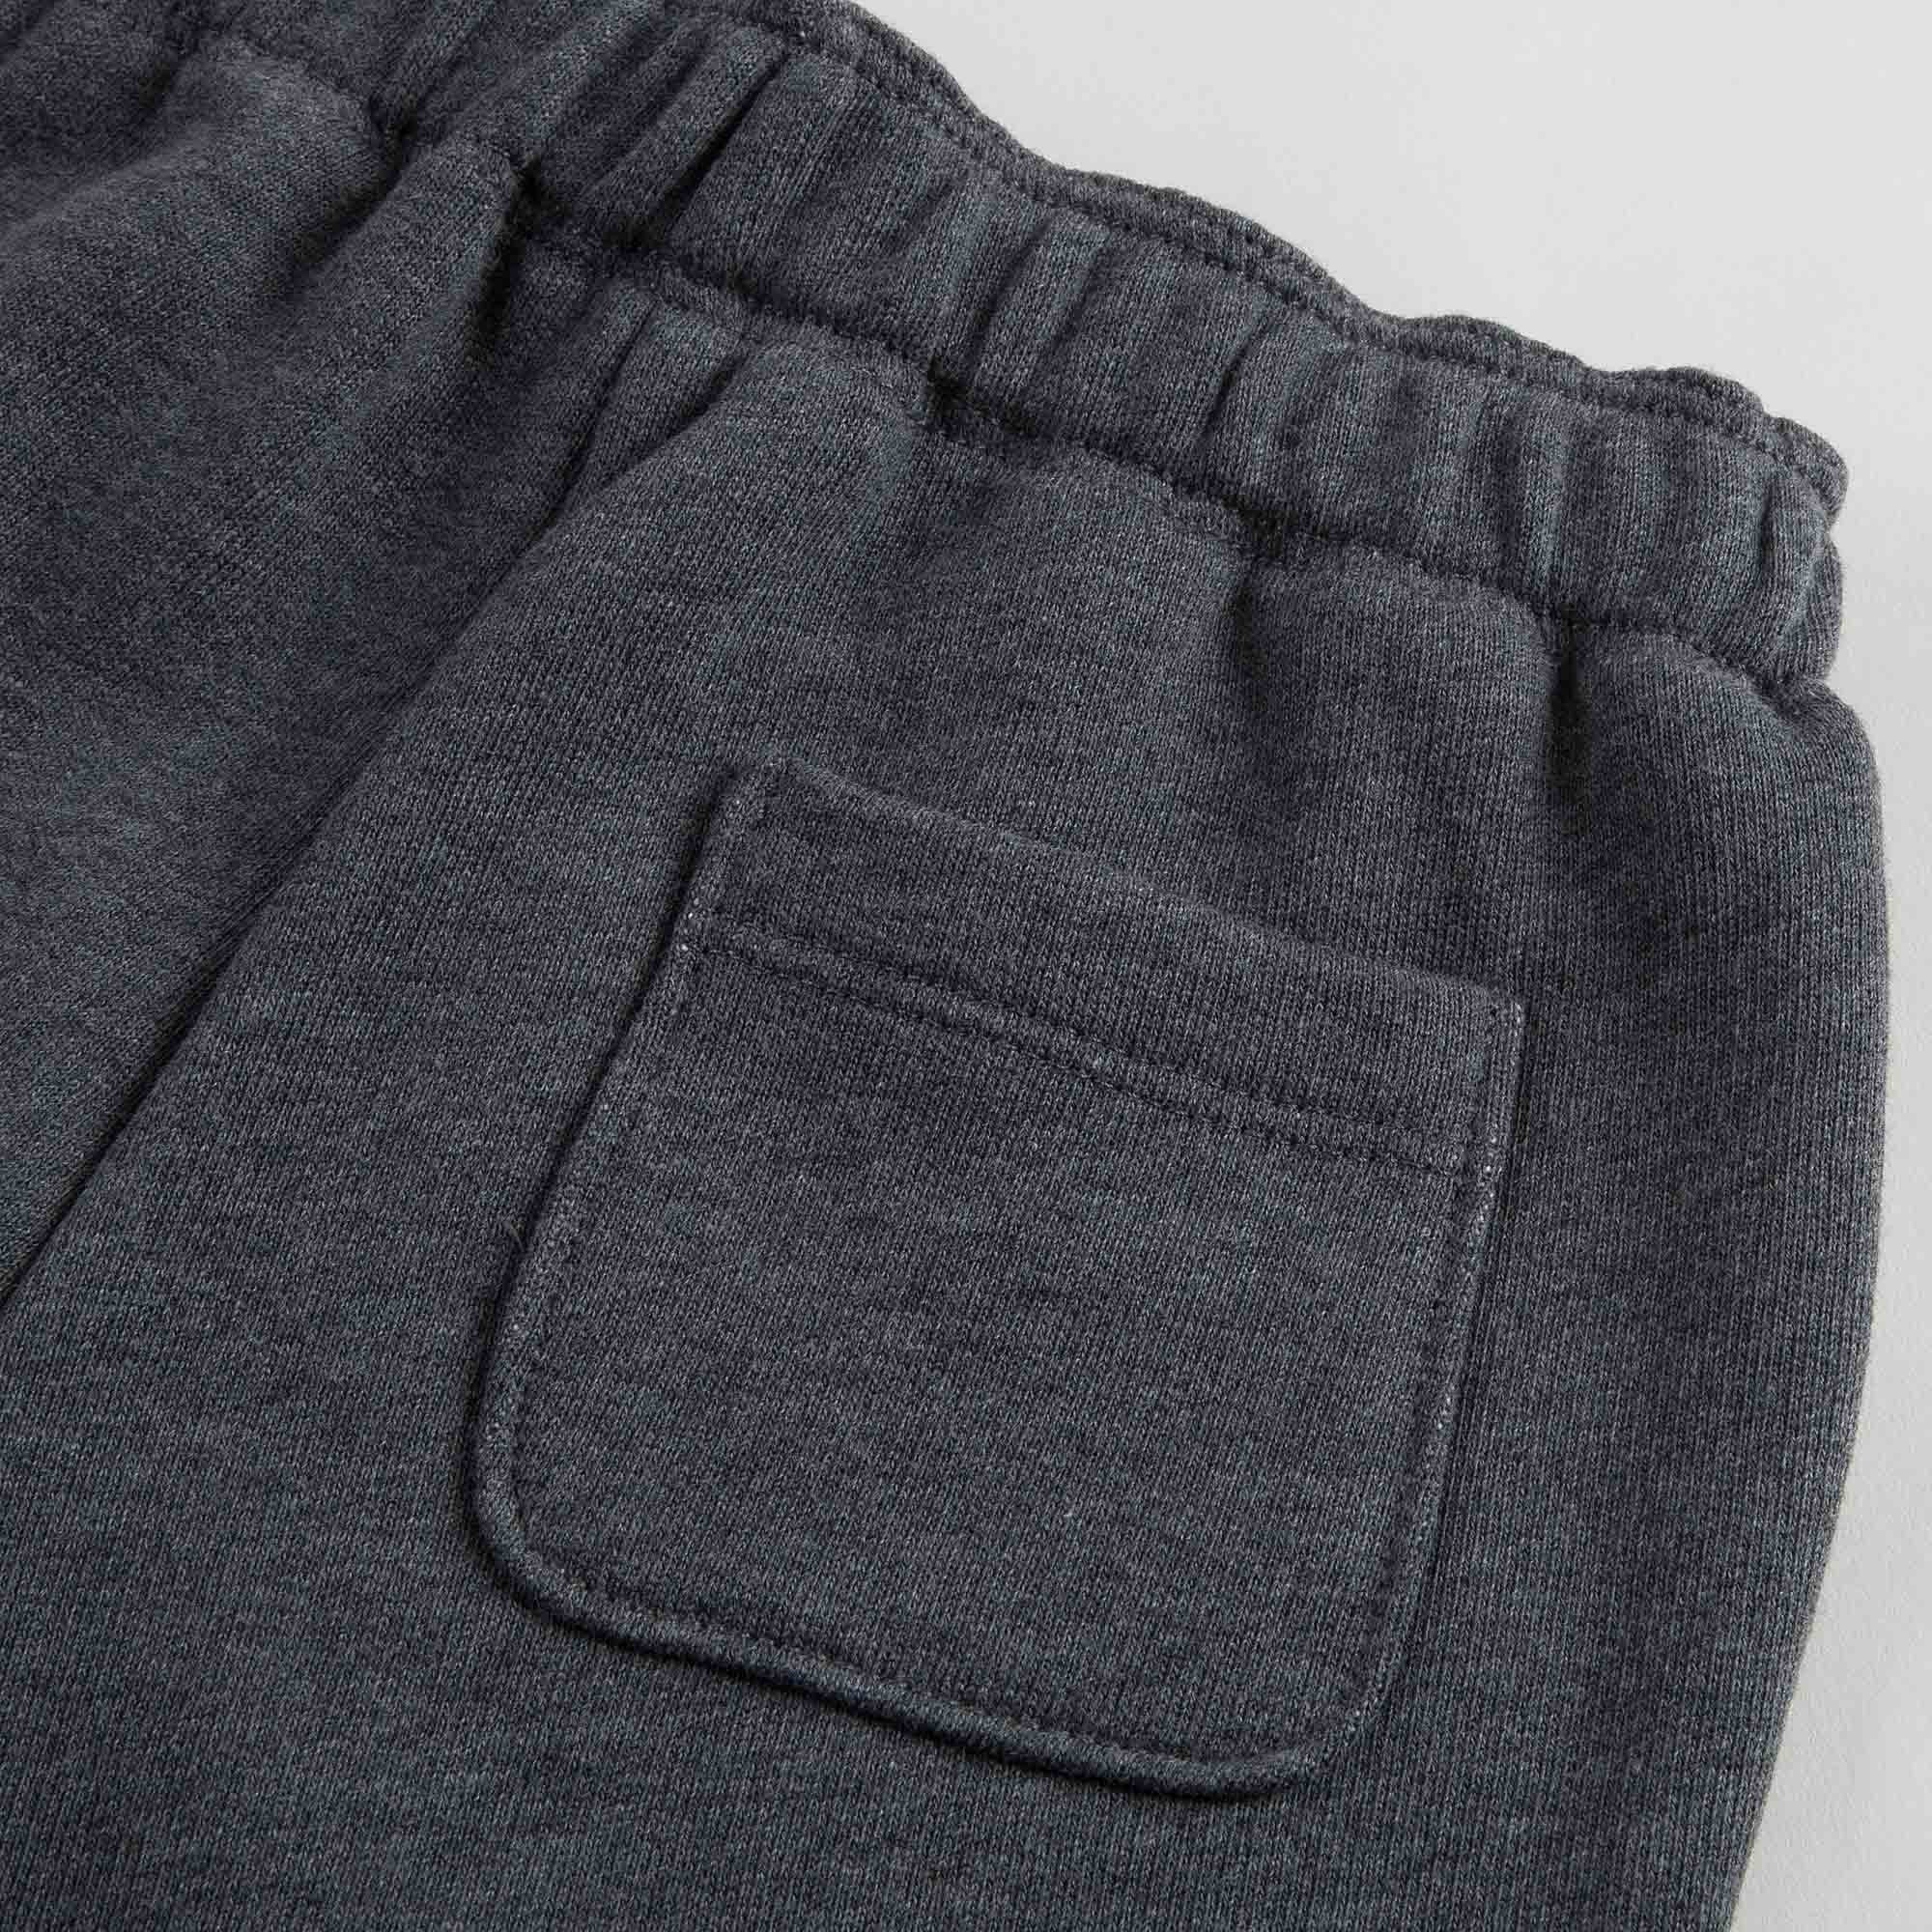 Baby Boys Grey Hooded Ribbed Cuffs Cotton Trouser - CÉMAROSE | Children's Fashion Store - 5